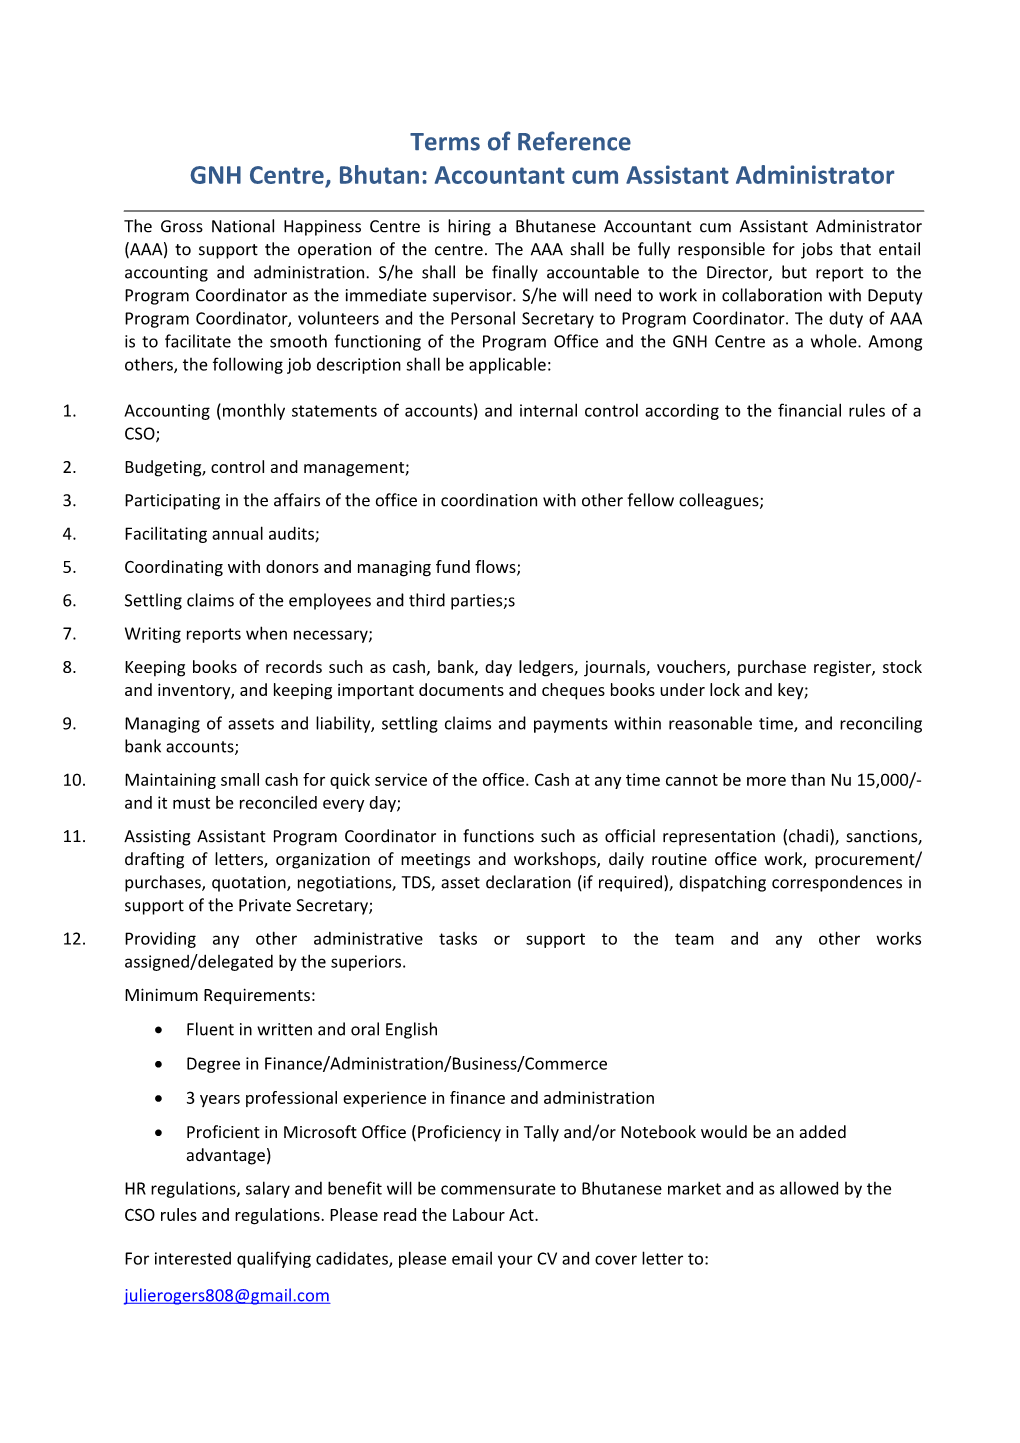 Terms of Reference GNH Centre, Bhutan: Accountant Cum Assistant Administrator